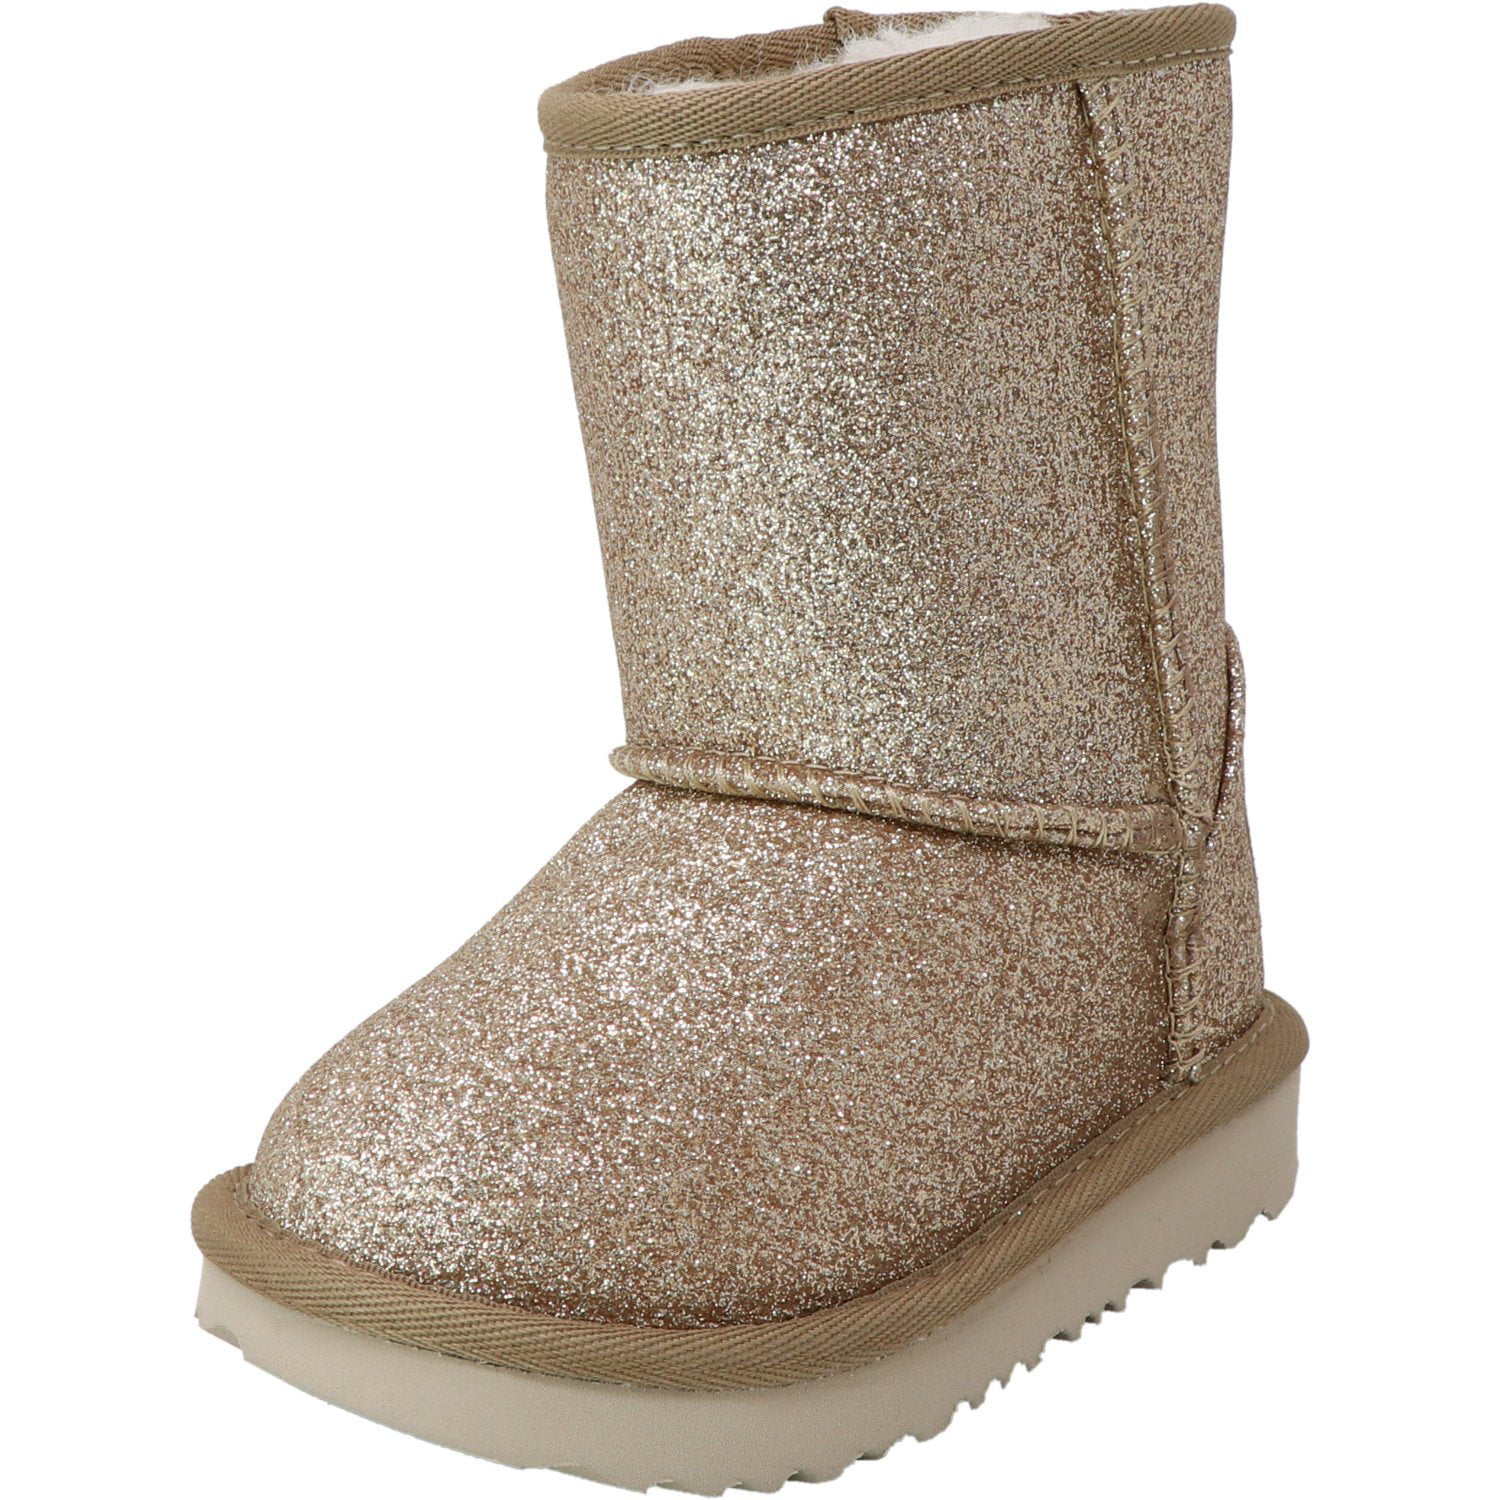 Ugg Women's Classic Short II Glitter Gold Ankle-High Suede Over